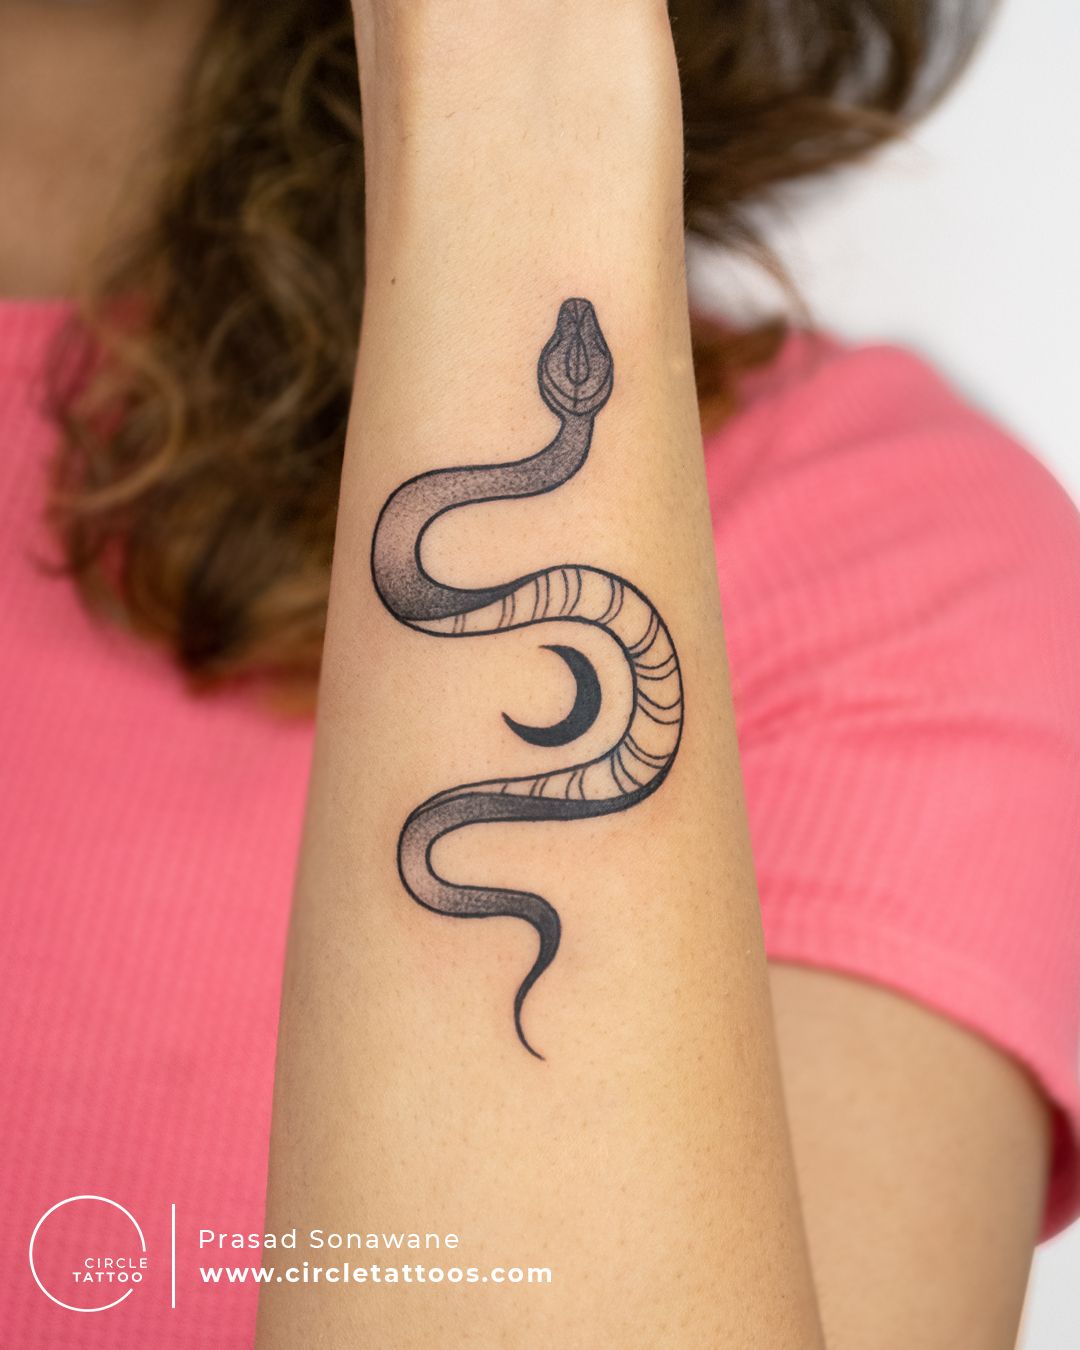 Snakes Tattoos: Find Your Perfect Serpent Ink! (406 Ideas) | Inkbox™